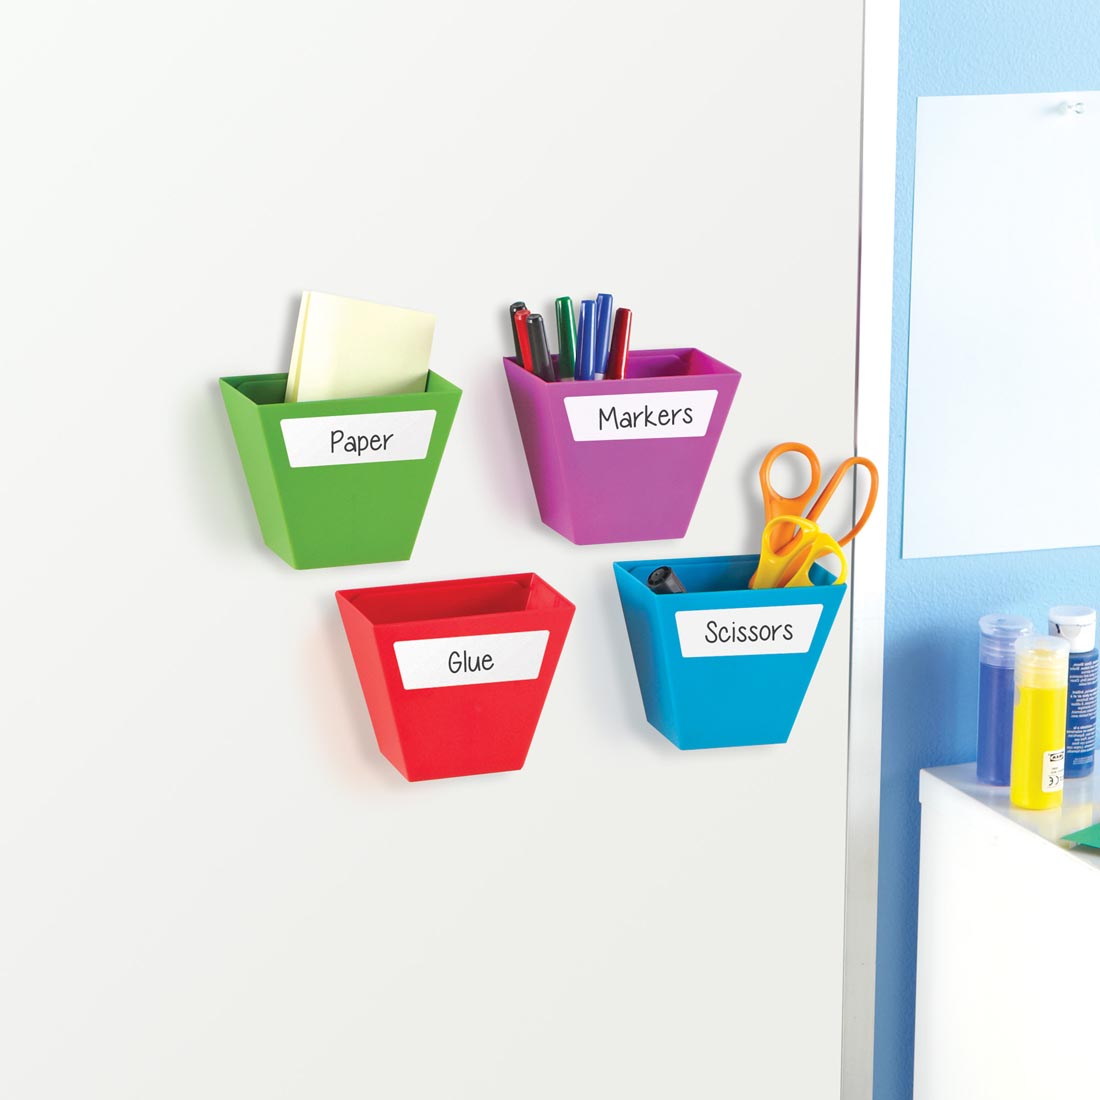 Four Colored Storage Bins hanging from a magnetic whiteboard